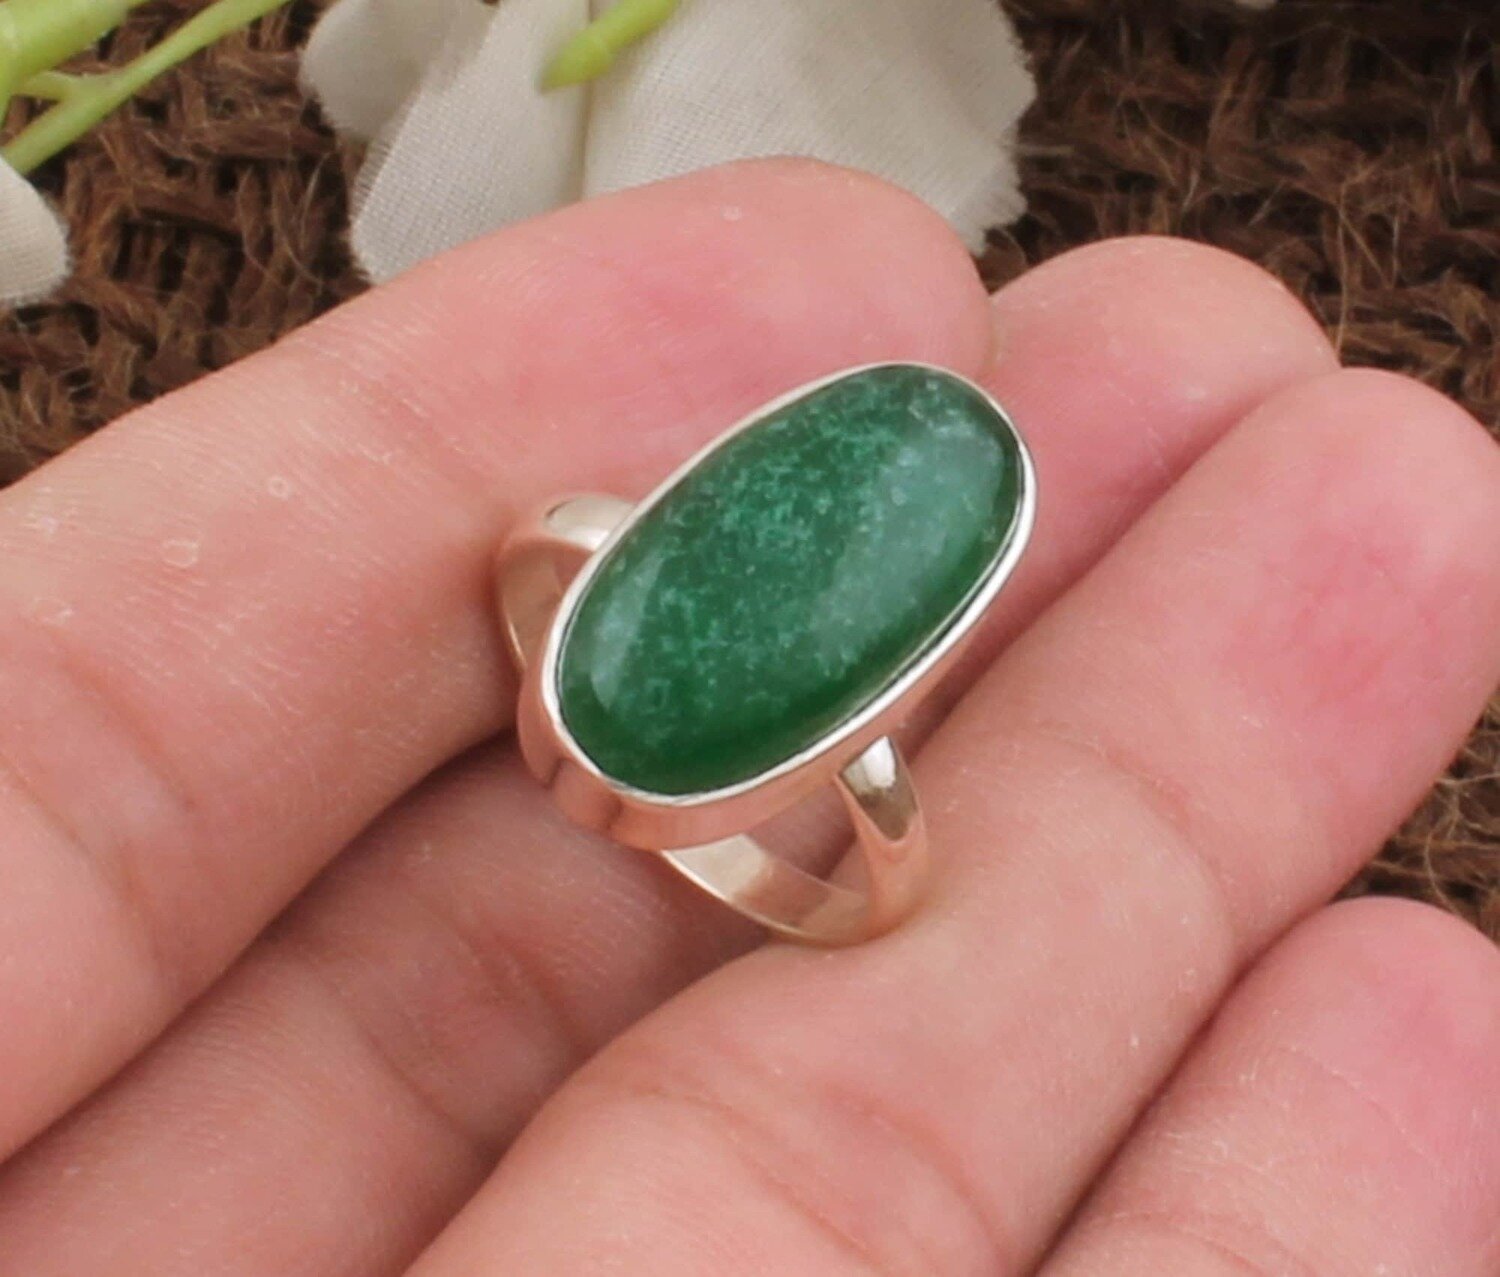 Green Jade Oval Shape Gemstone Silver Ring | 925 Sterling Solid Silver Ring | Handmade Boho Everyday Jewelry |Valentine's Day Ring Gift Idea